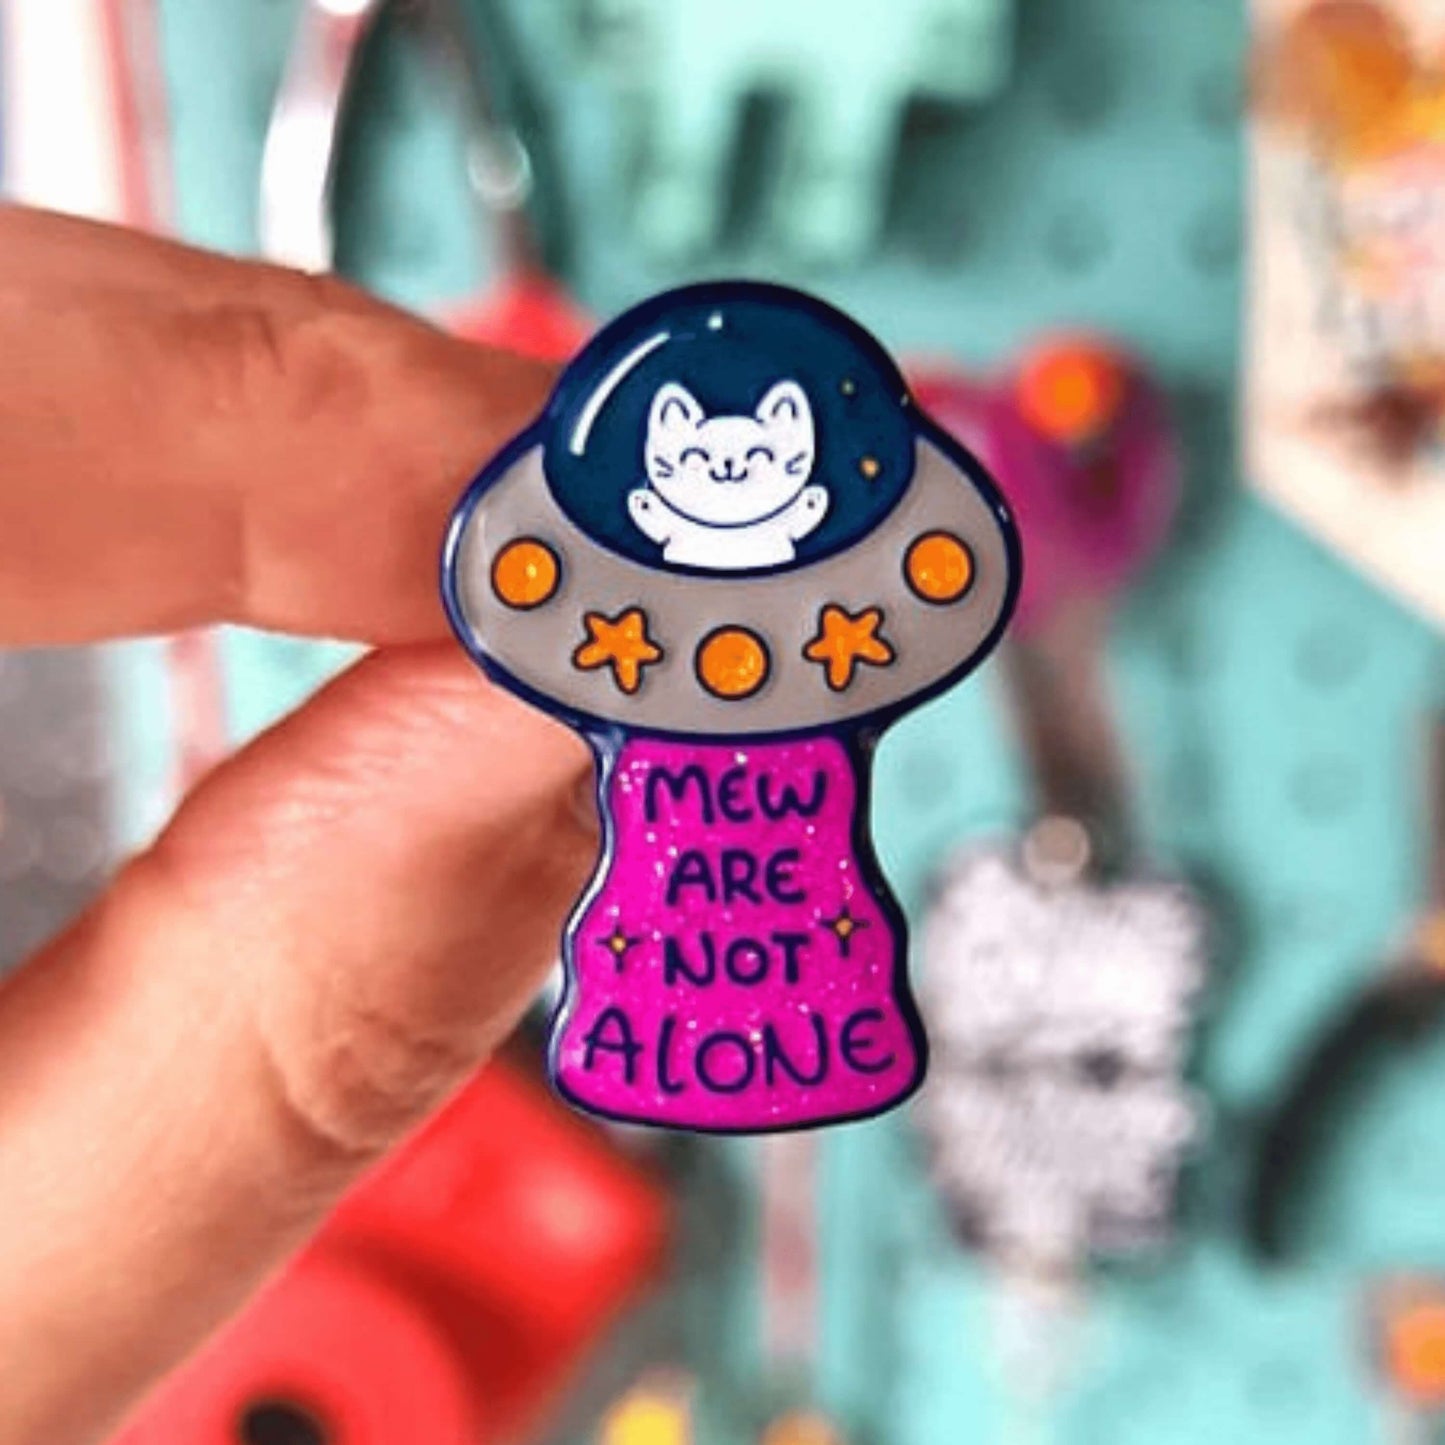 The Cat UFO Mew are not Alone Enamel Pin being held up with a blurry out of focus background. The blue outline pin is of a white smiling cat in a silver ufo spaceship with yellow glittery stars and circles, underneath is pink glittery beam with blue text reading 'mew are not alone' a pun on you are not alone.